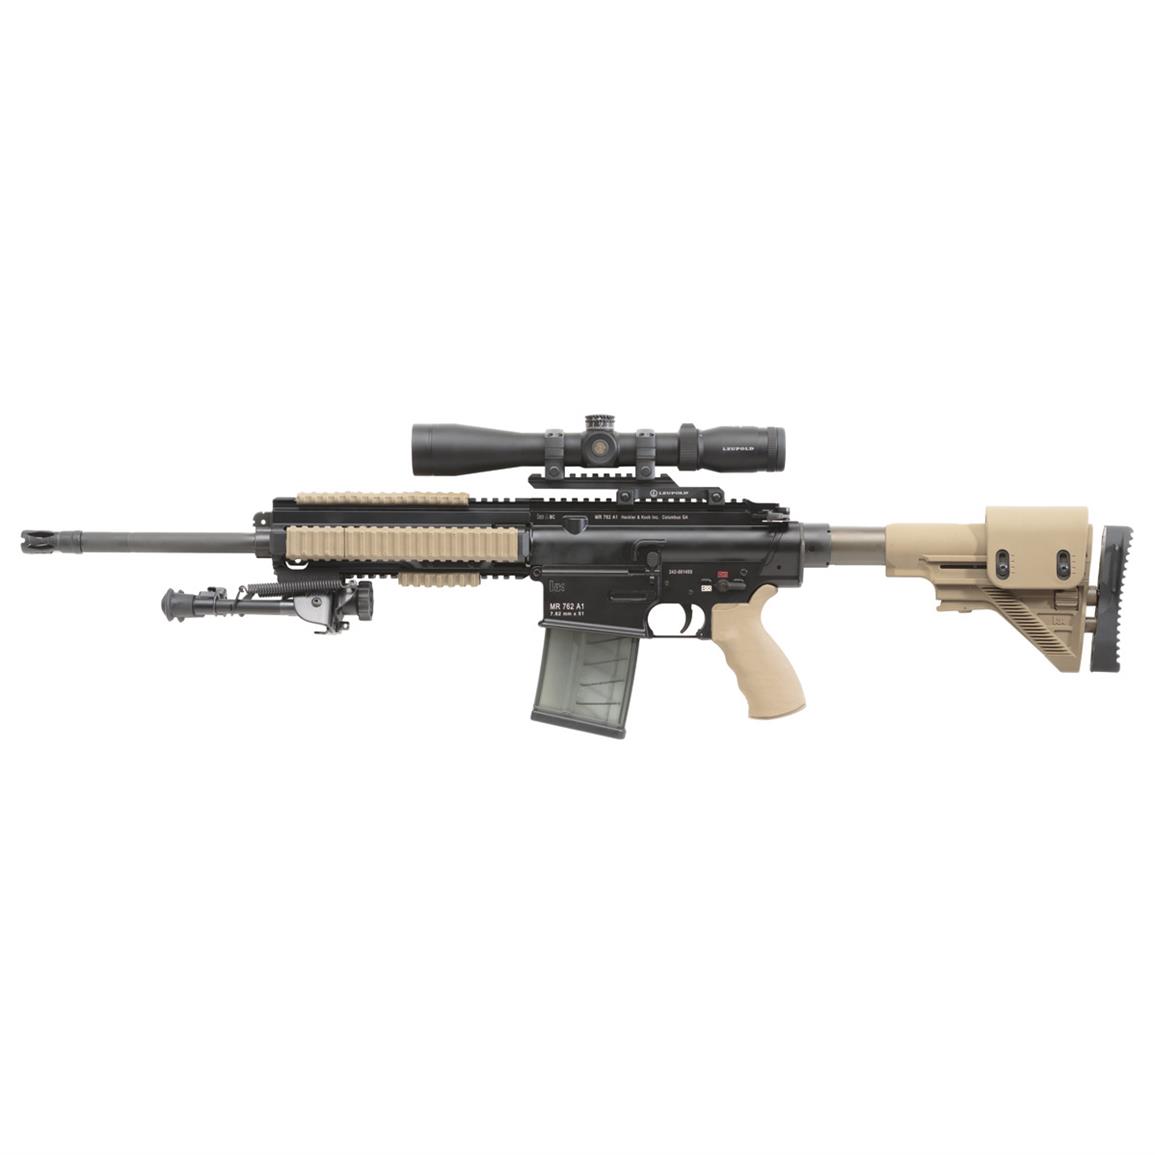 Heckler & Koch MR762A1 Rifle, Semi-Automatic, .308 Winchester, 3-9x40mm Scope, 20+1 Rounds